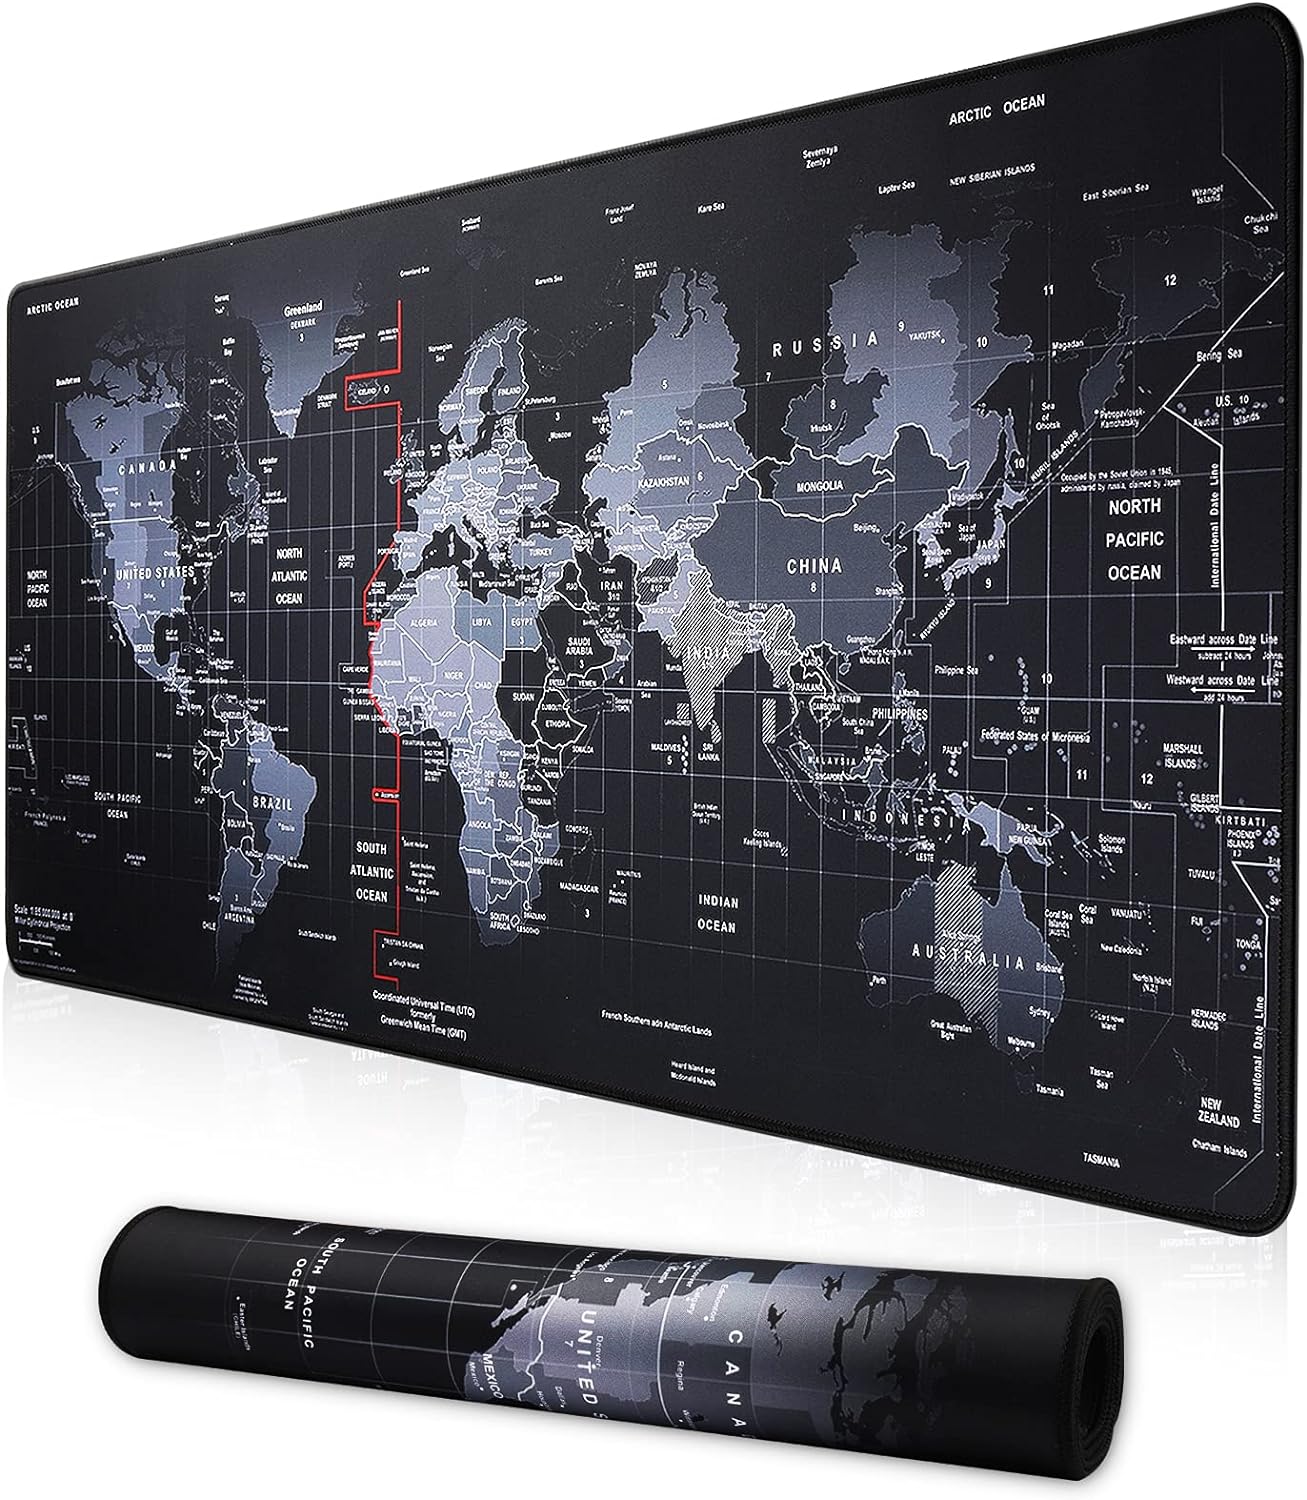 Cmhoo XXL Professional Large Mouse Pad & Computer Game Mouse Mat (35.4x15.7x0.1IN, Map) (90 * 40 Map)